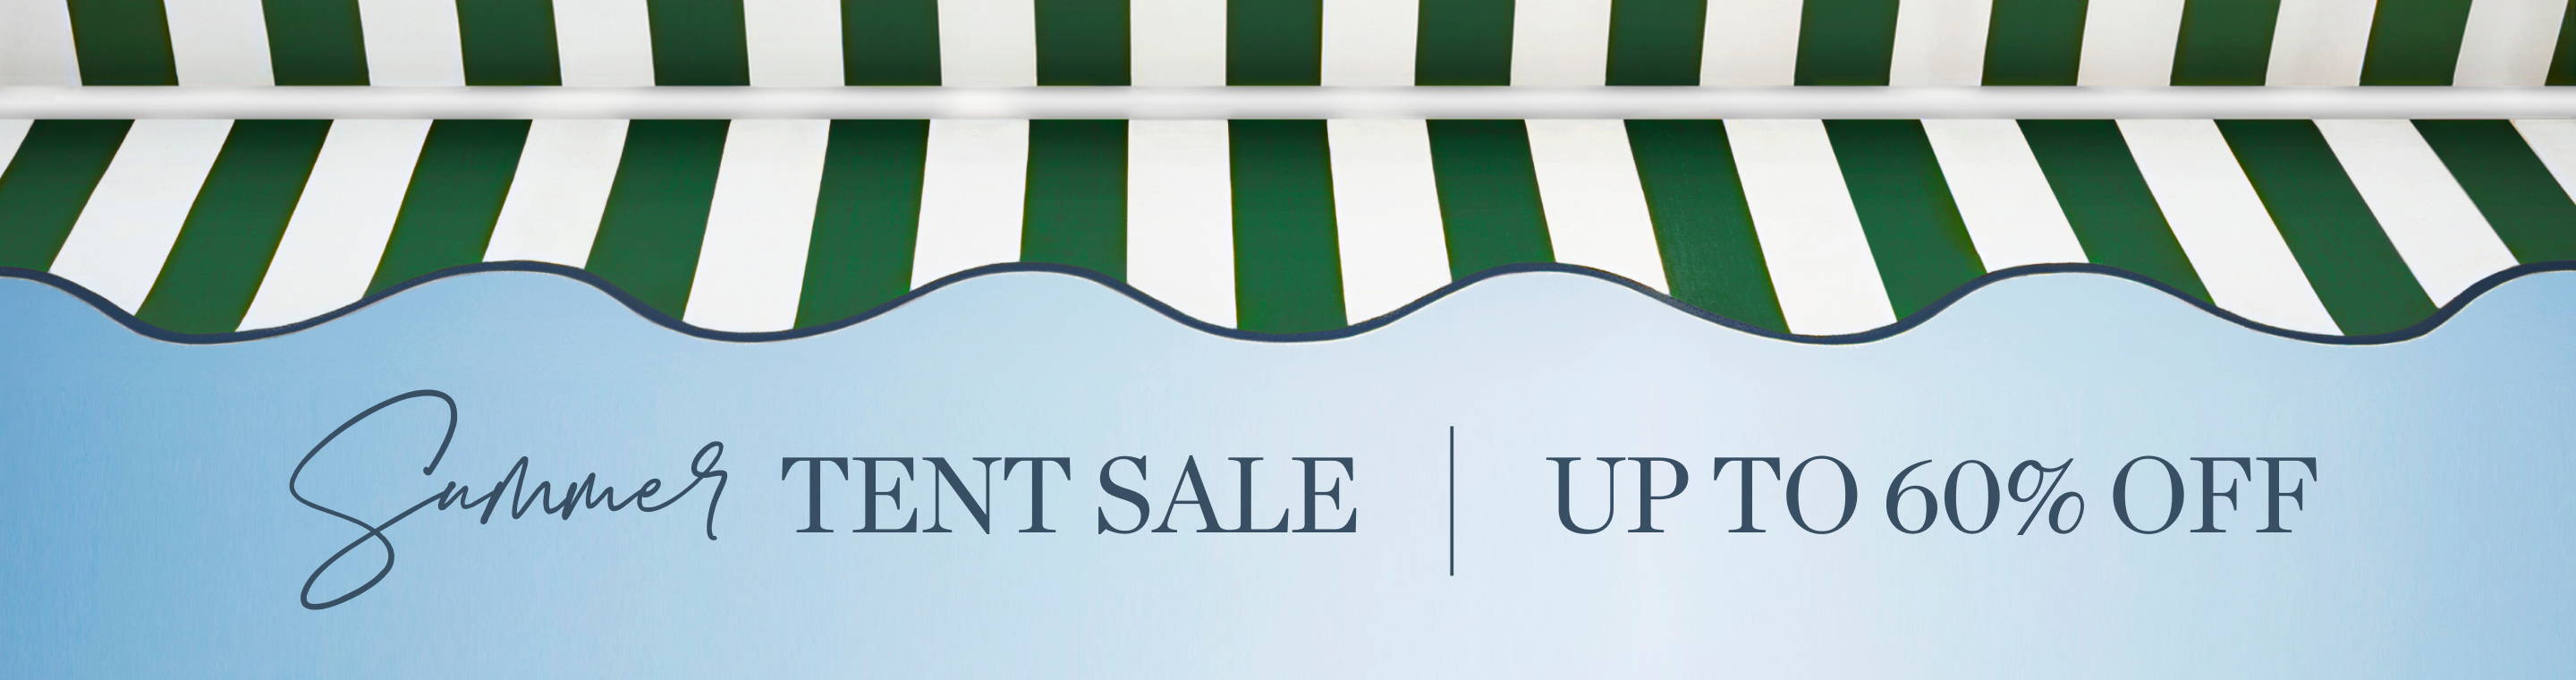 Summer Tent Sale Up to 60% Off